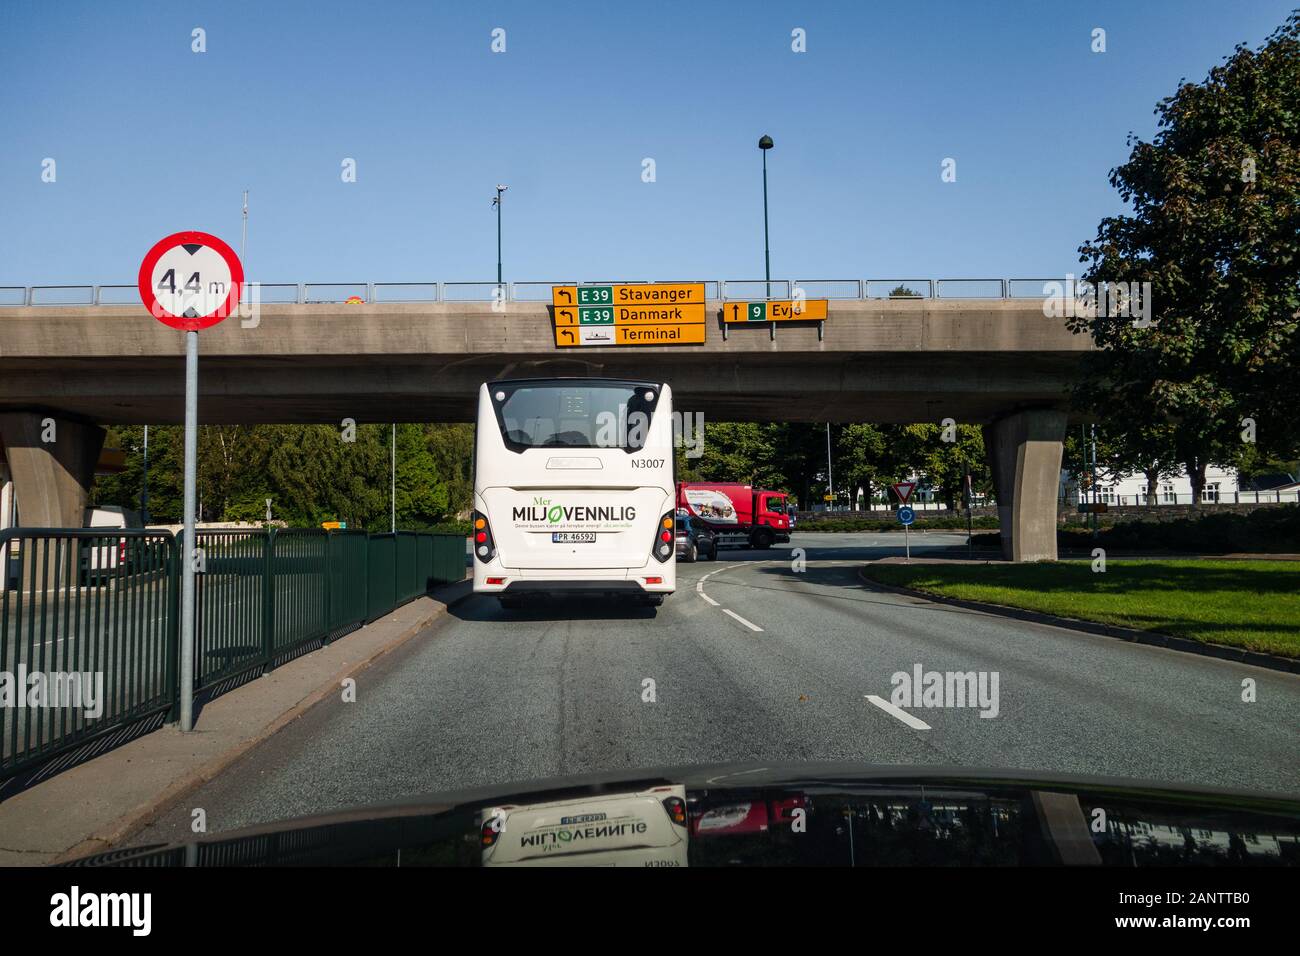 Editorial 09.02.2019 Kristiansand Norway Driving out from the city on the E39 road to Stavanger with an environment friendly bus in front Stock Photo